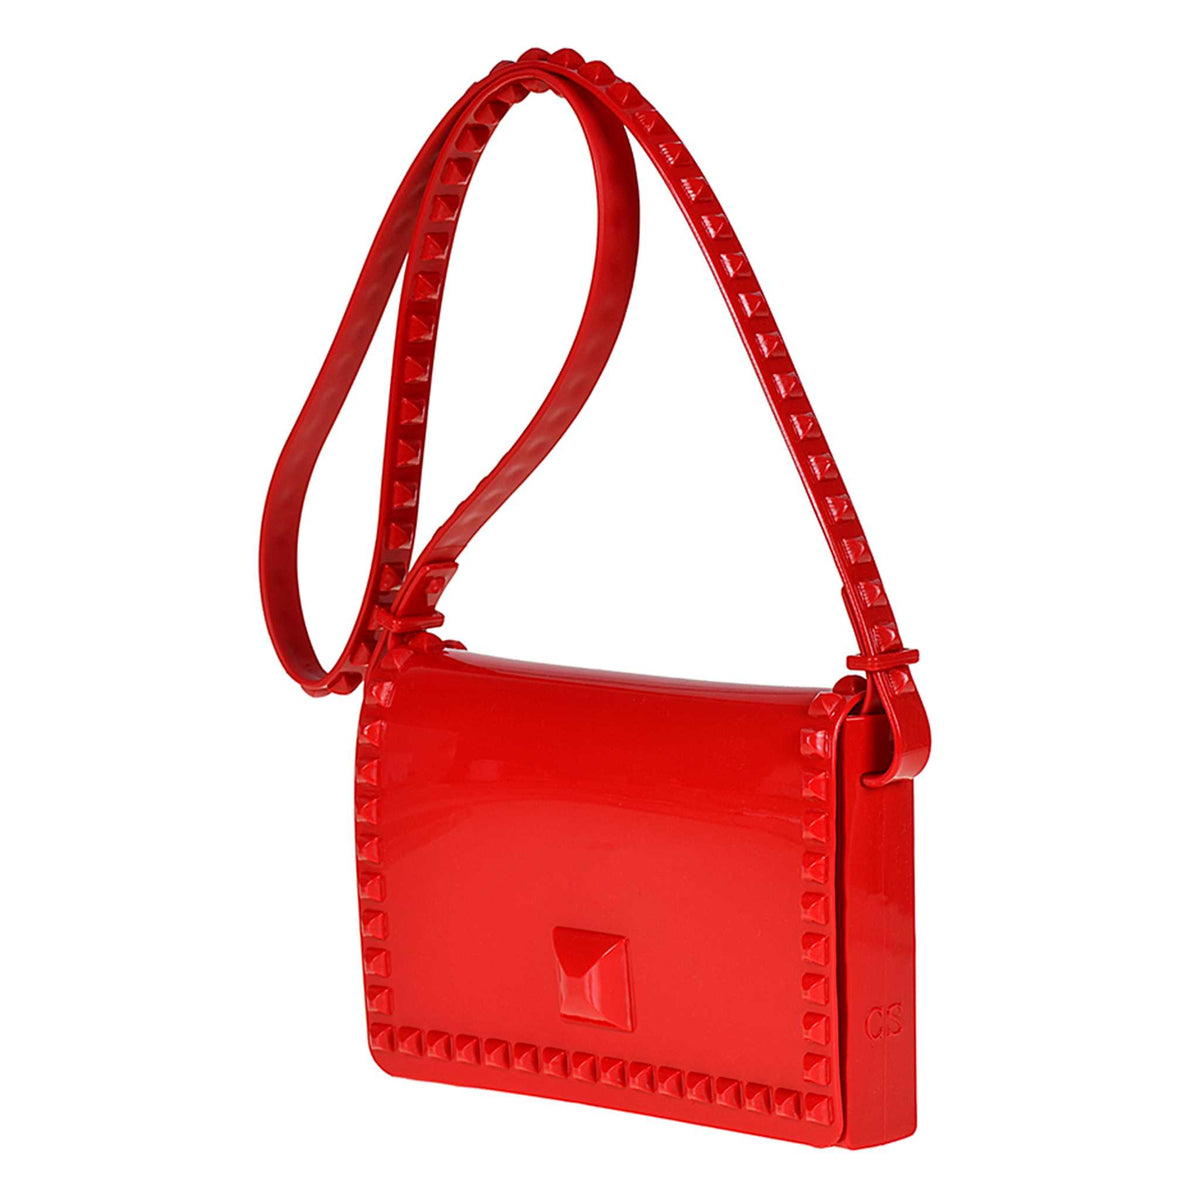 Flap jelly crossbody bag in color red from Carmen Sol